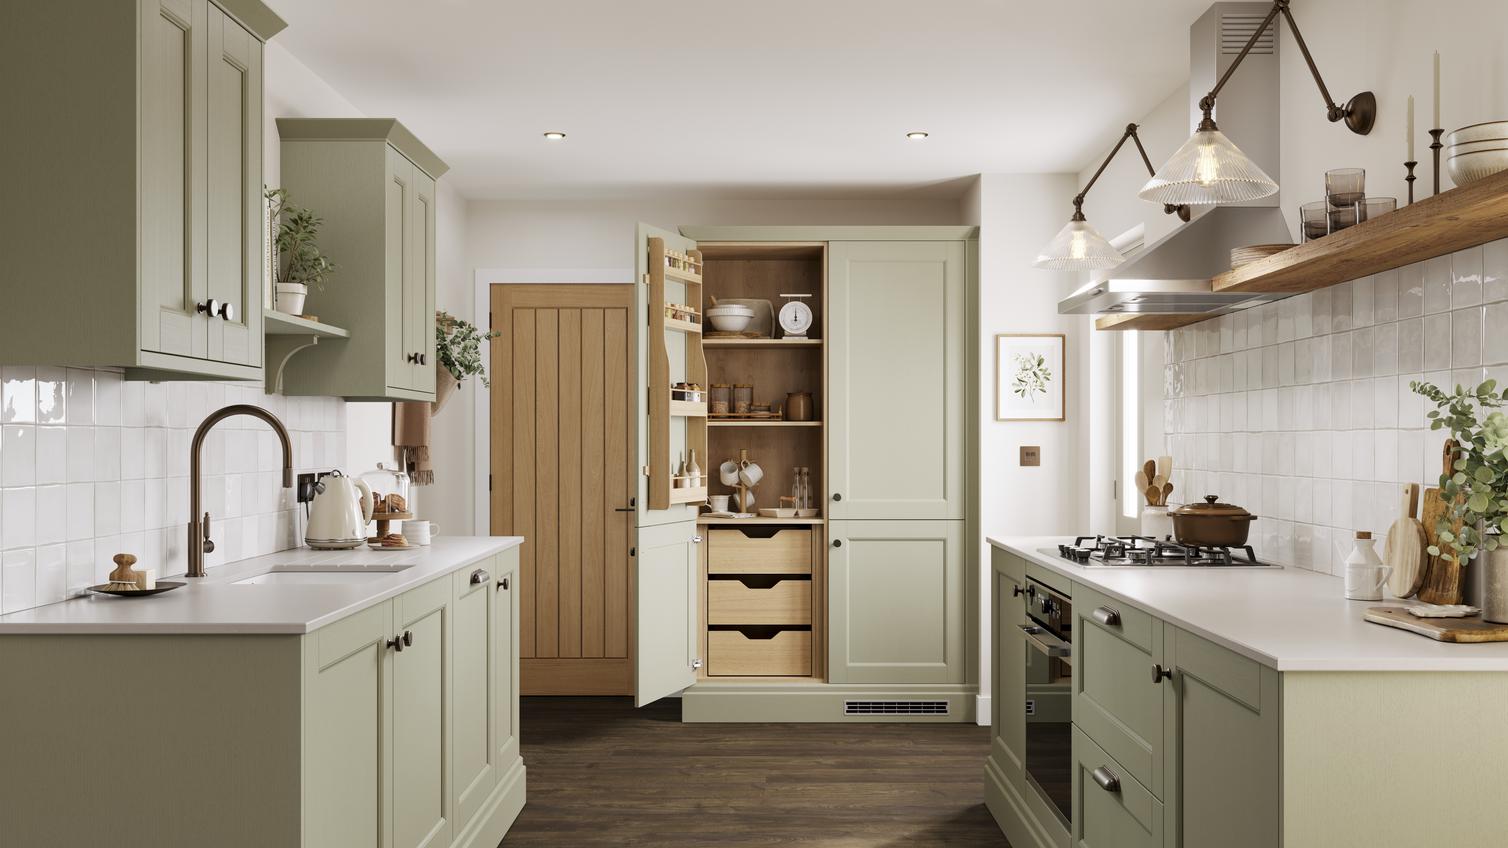 A sage green shaker kitchen with larder unit in a galley layout. It has dark oak flooring and shelving, and white worktops.